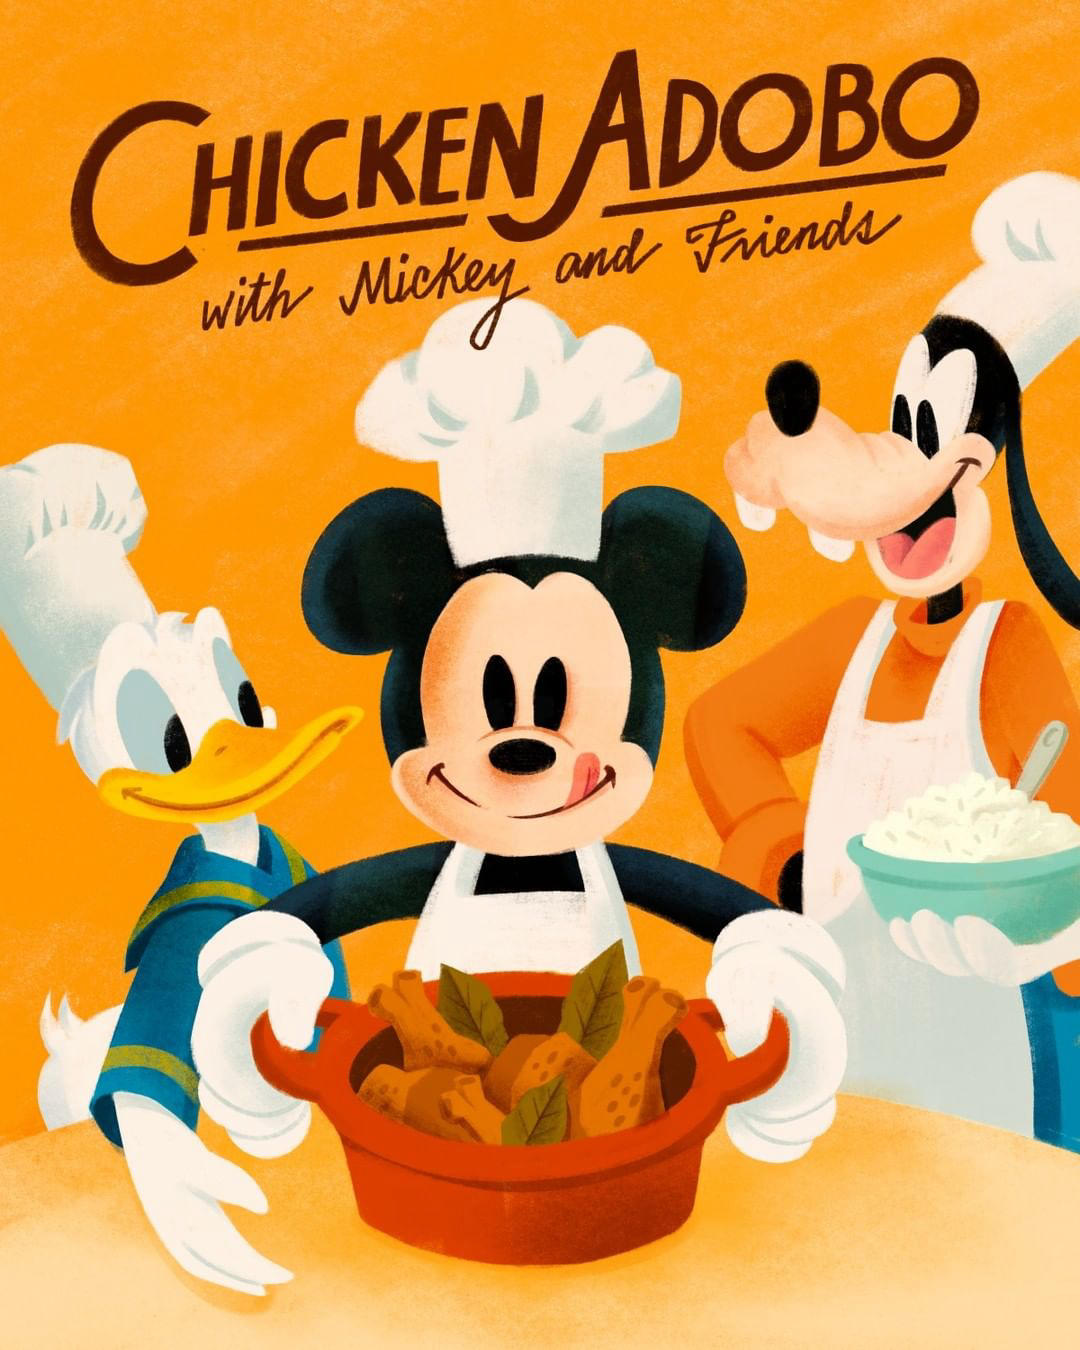 Mickey Mouse - Mickey and friends are here to share a special chicken adobo recipe